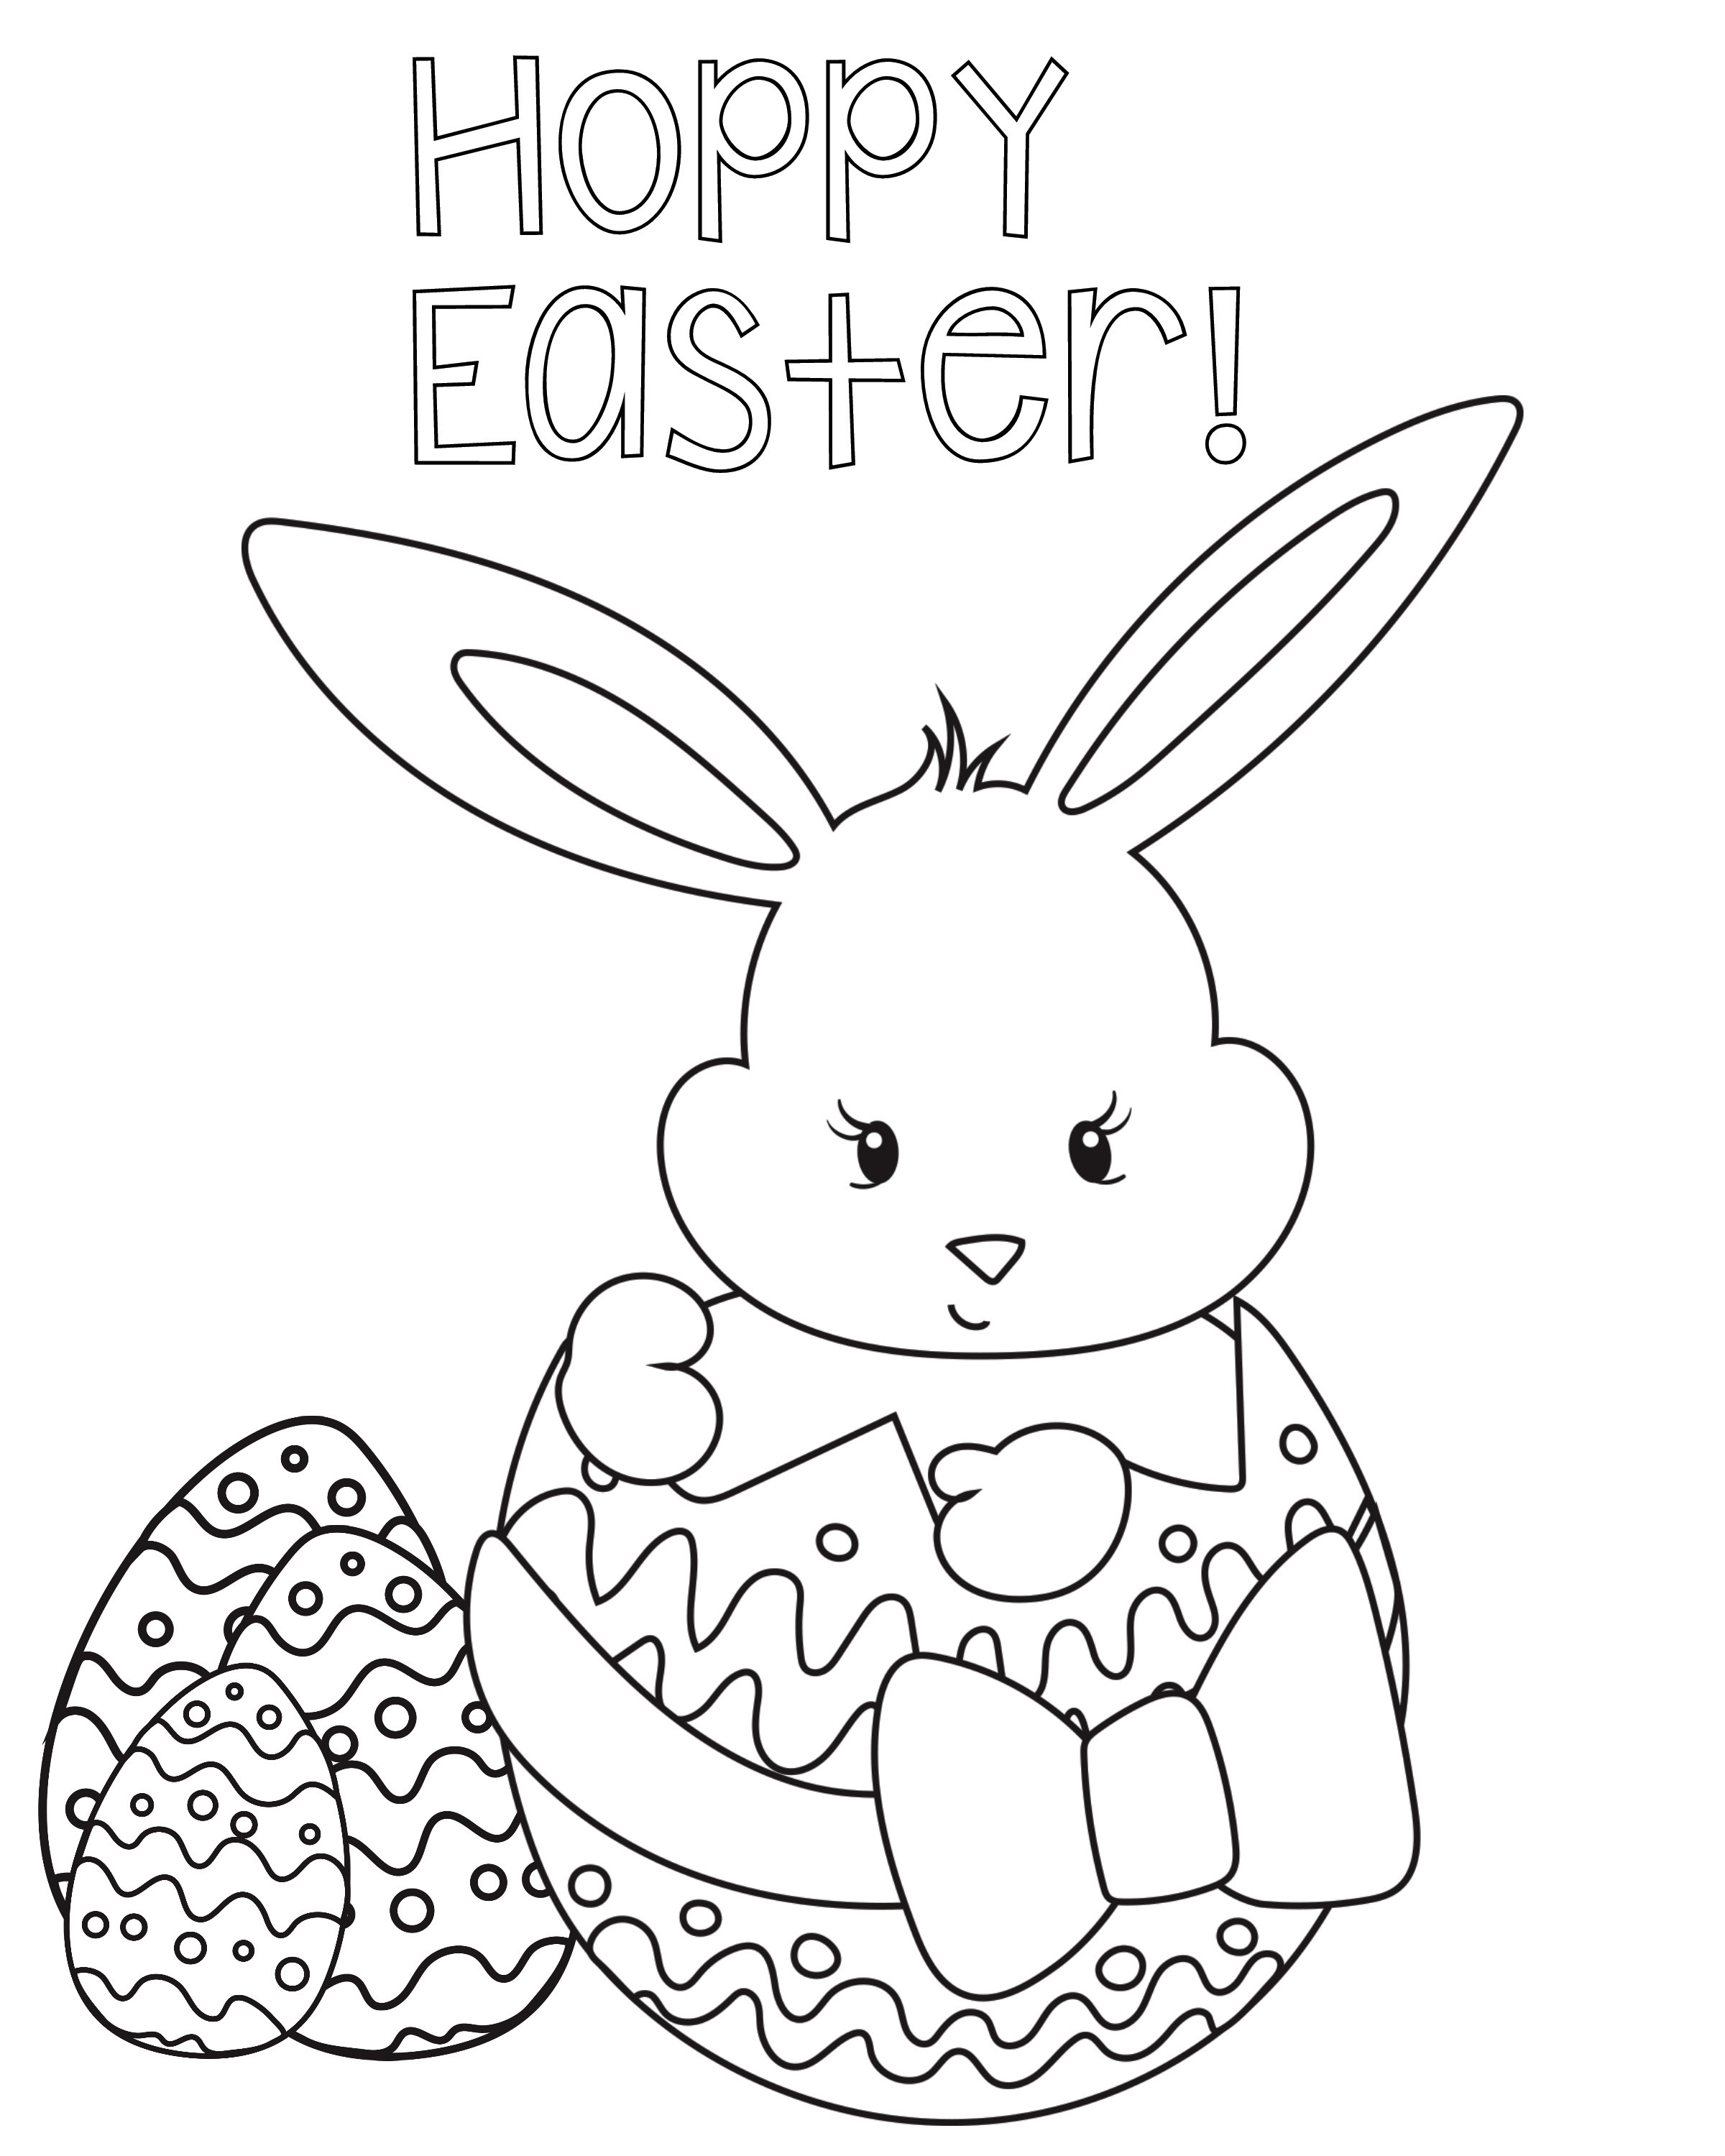 Happy Easter Coloring Pages
 Happy Easter Coloring Pages Best Coloring Pages For Kids